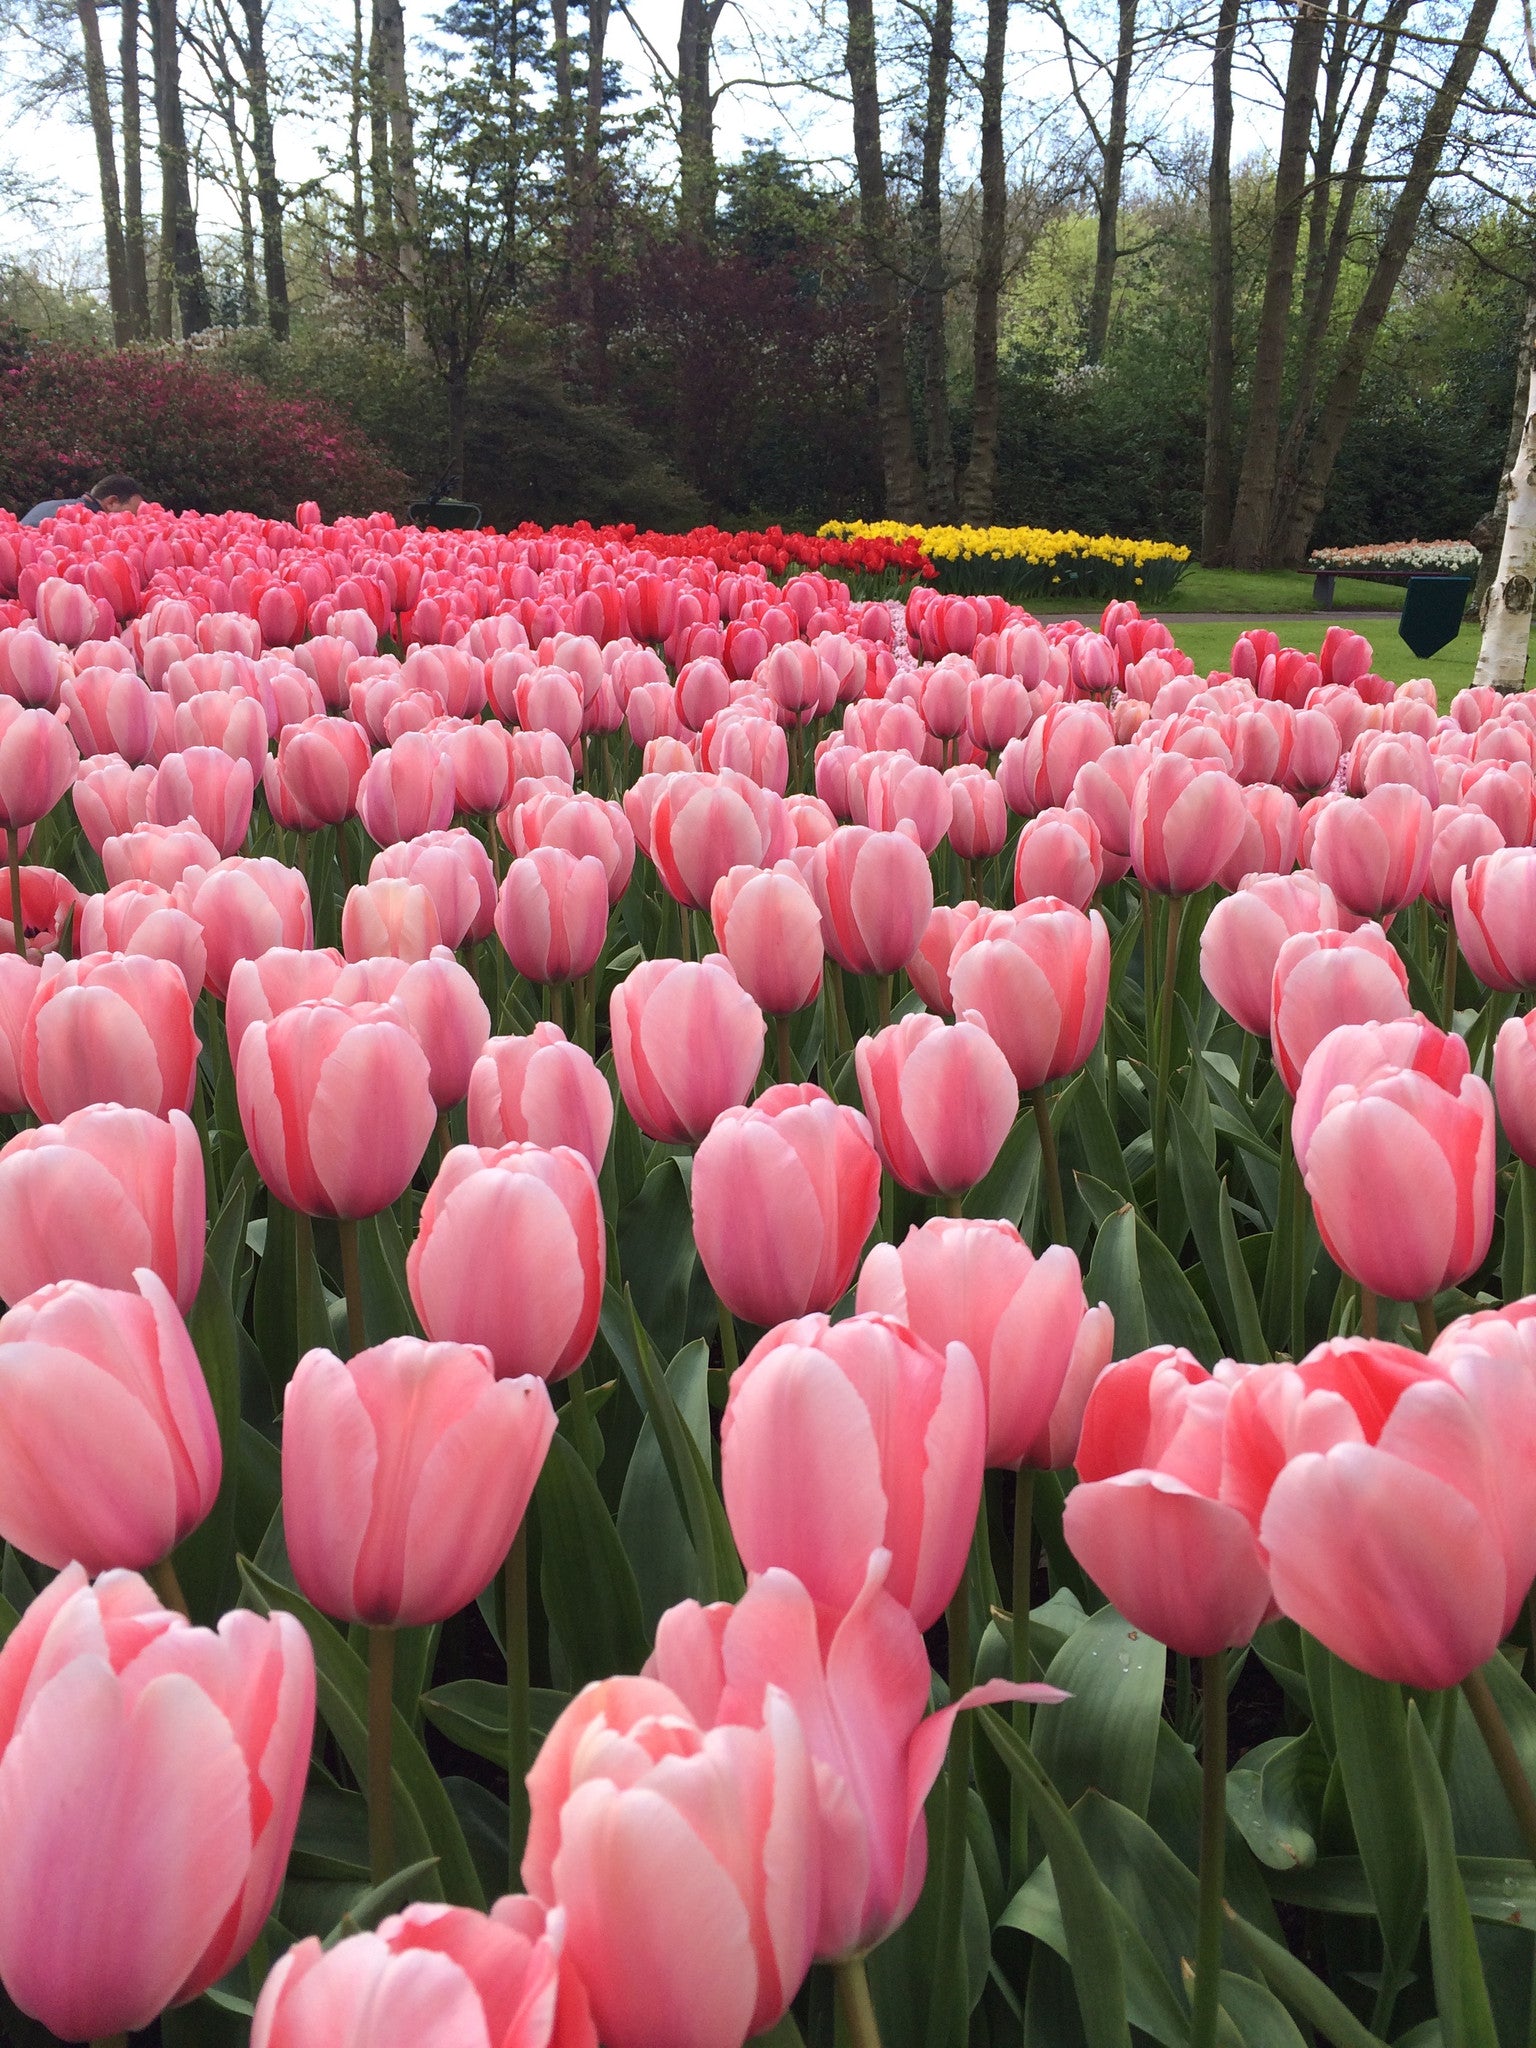 Tulips are blossoming, are you?